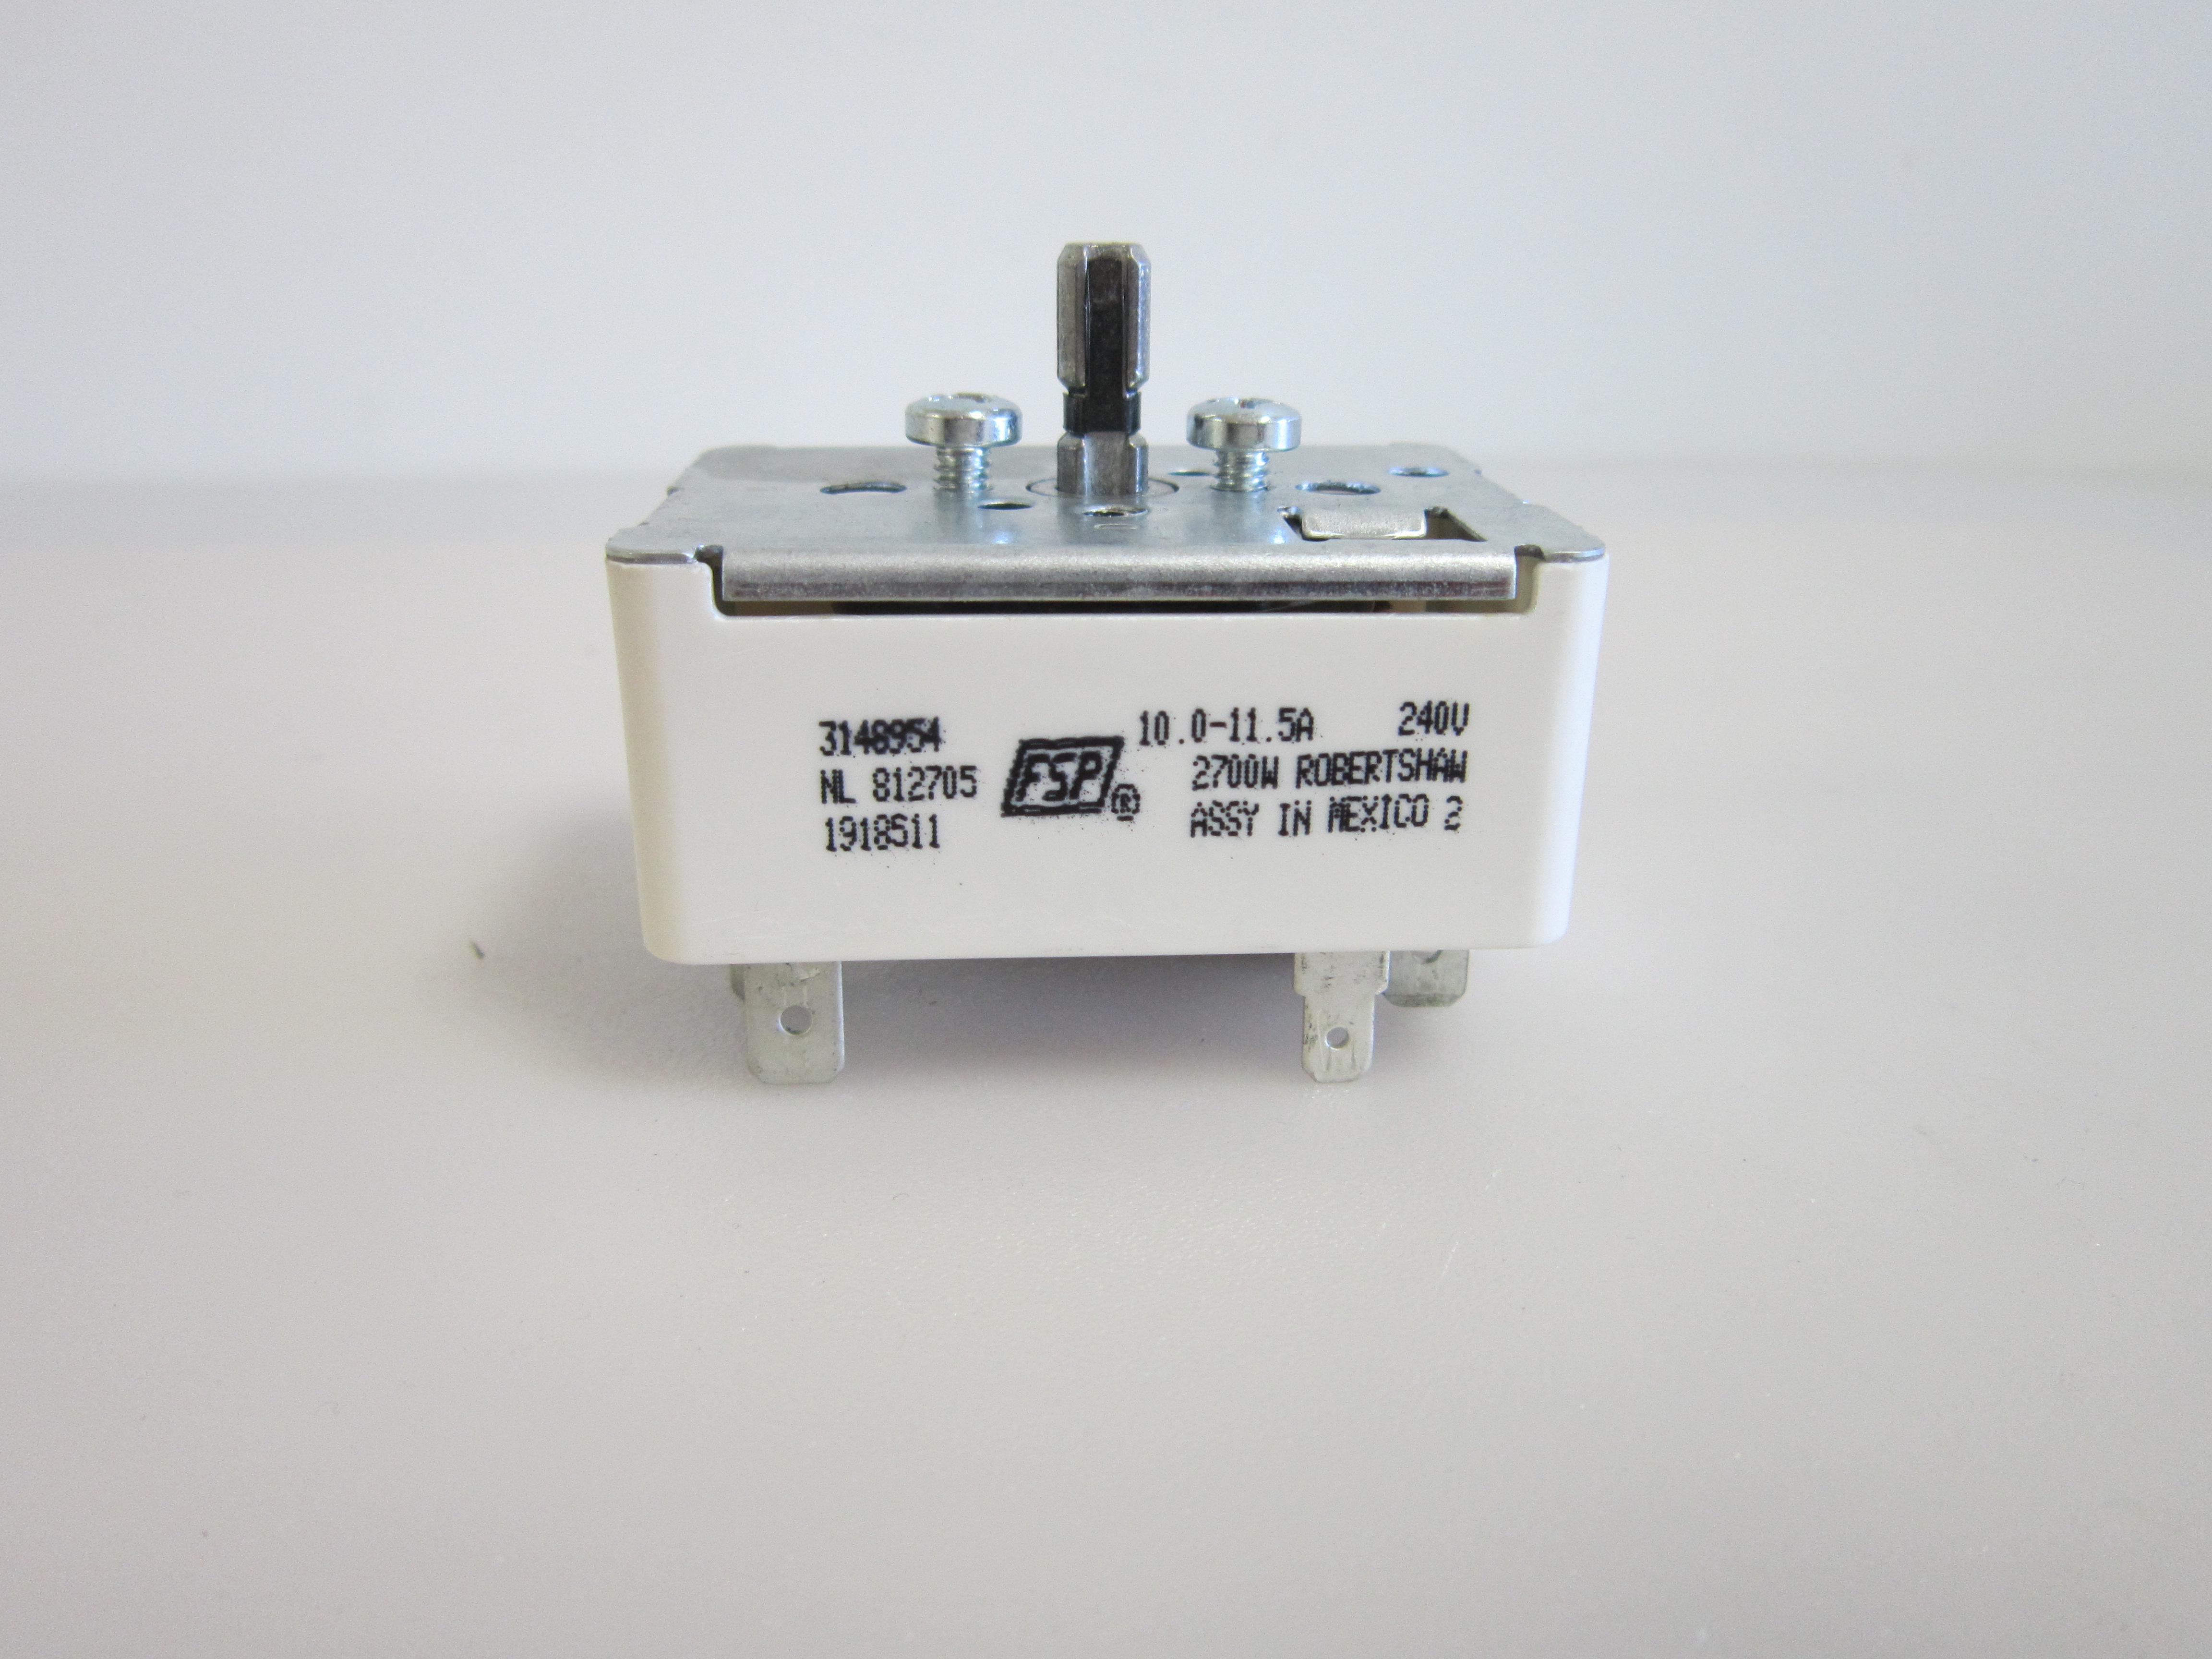 Details about   Whirlpool Range Surface Element Control Switch WP3149400 3148954 